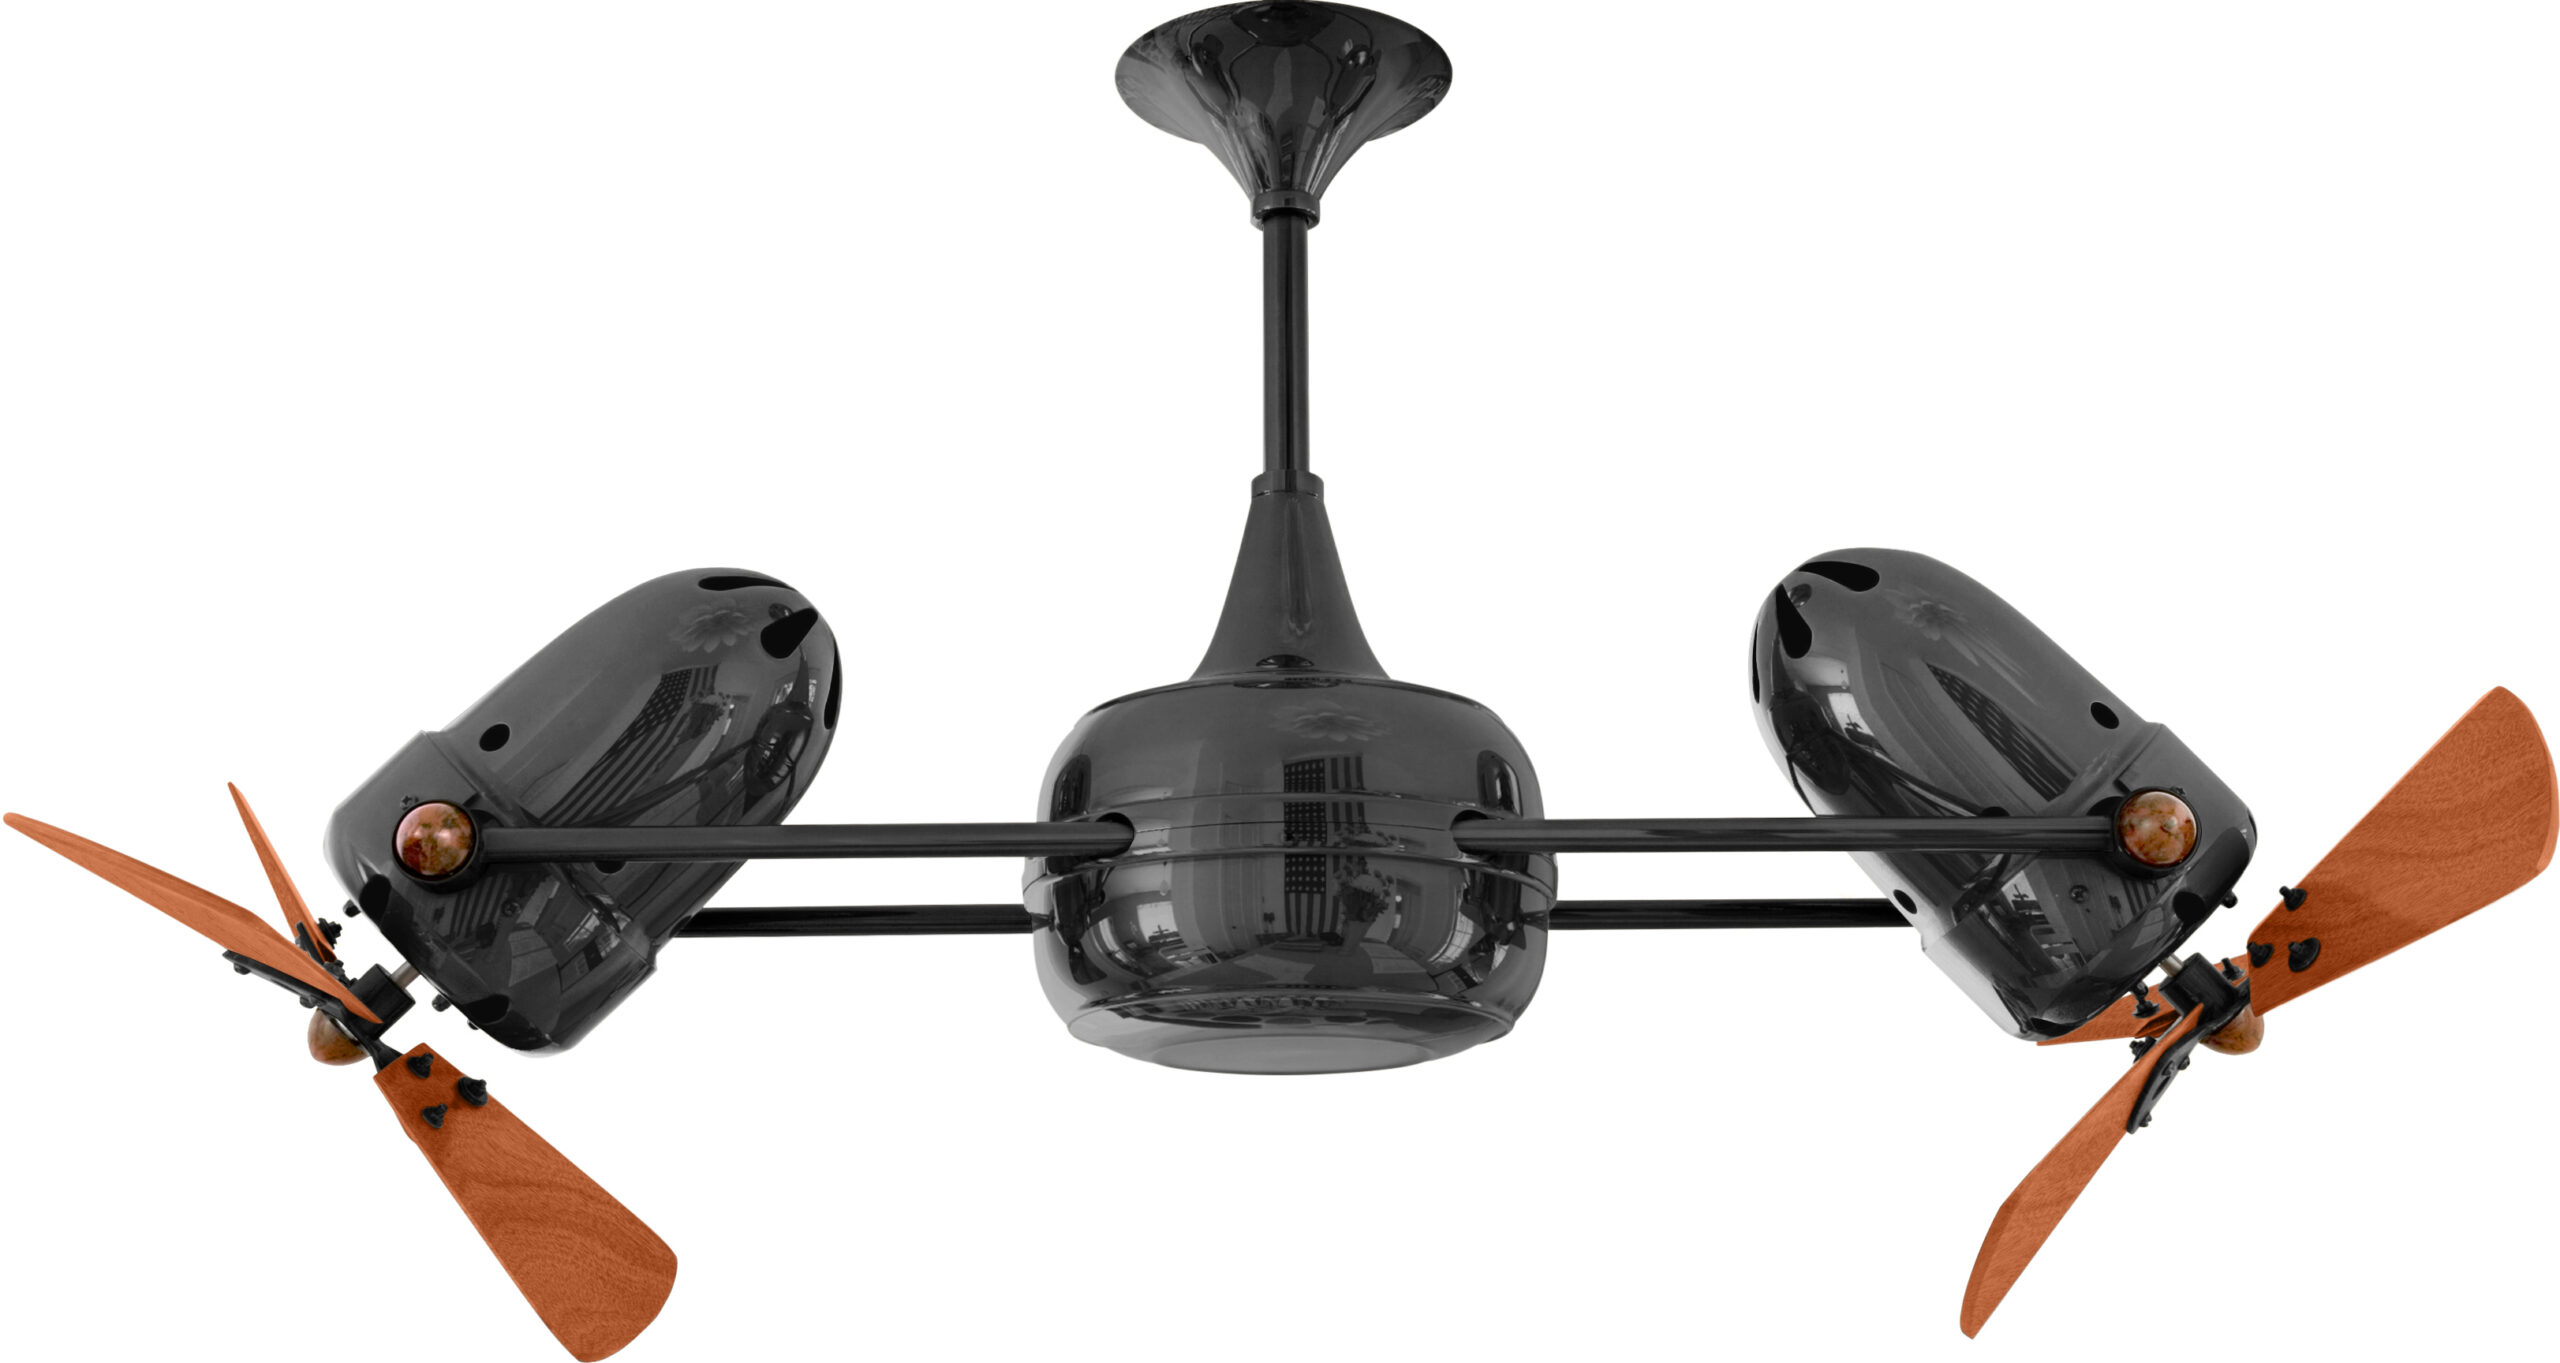 Duplo Dinamico rotational dual head ceiling fan in black nickel finish with solid mahogany wood blades made by Matthews Fan Company.